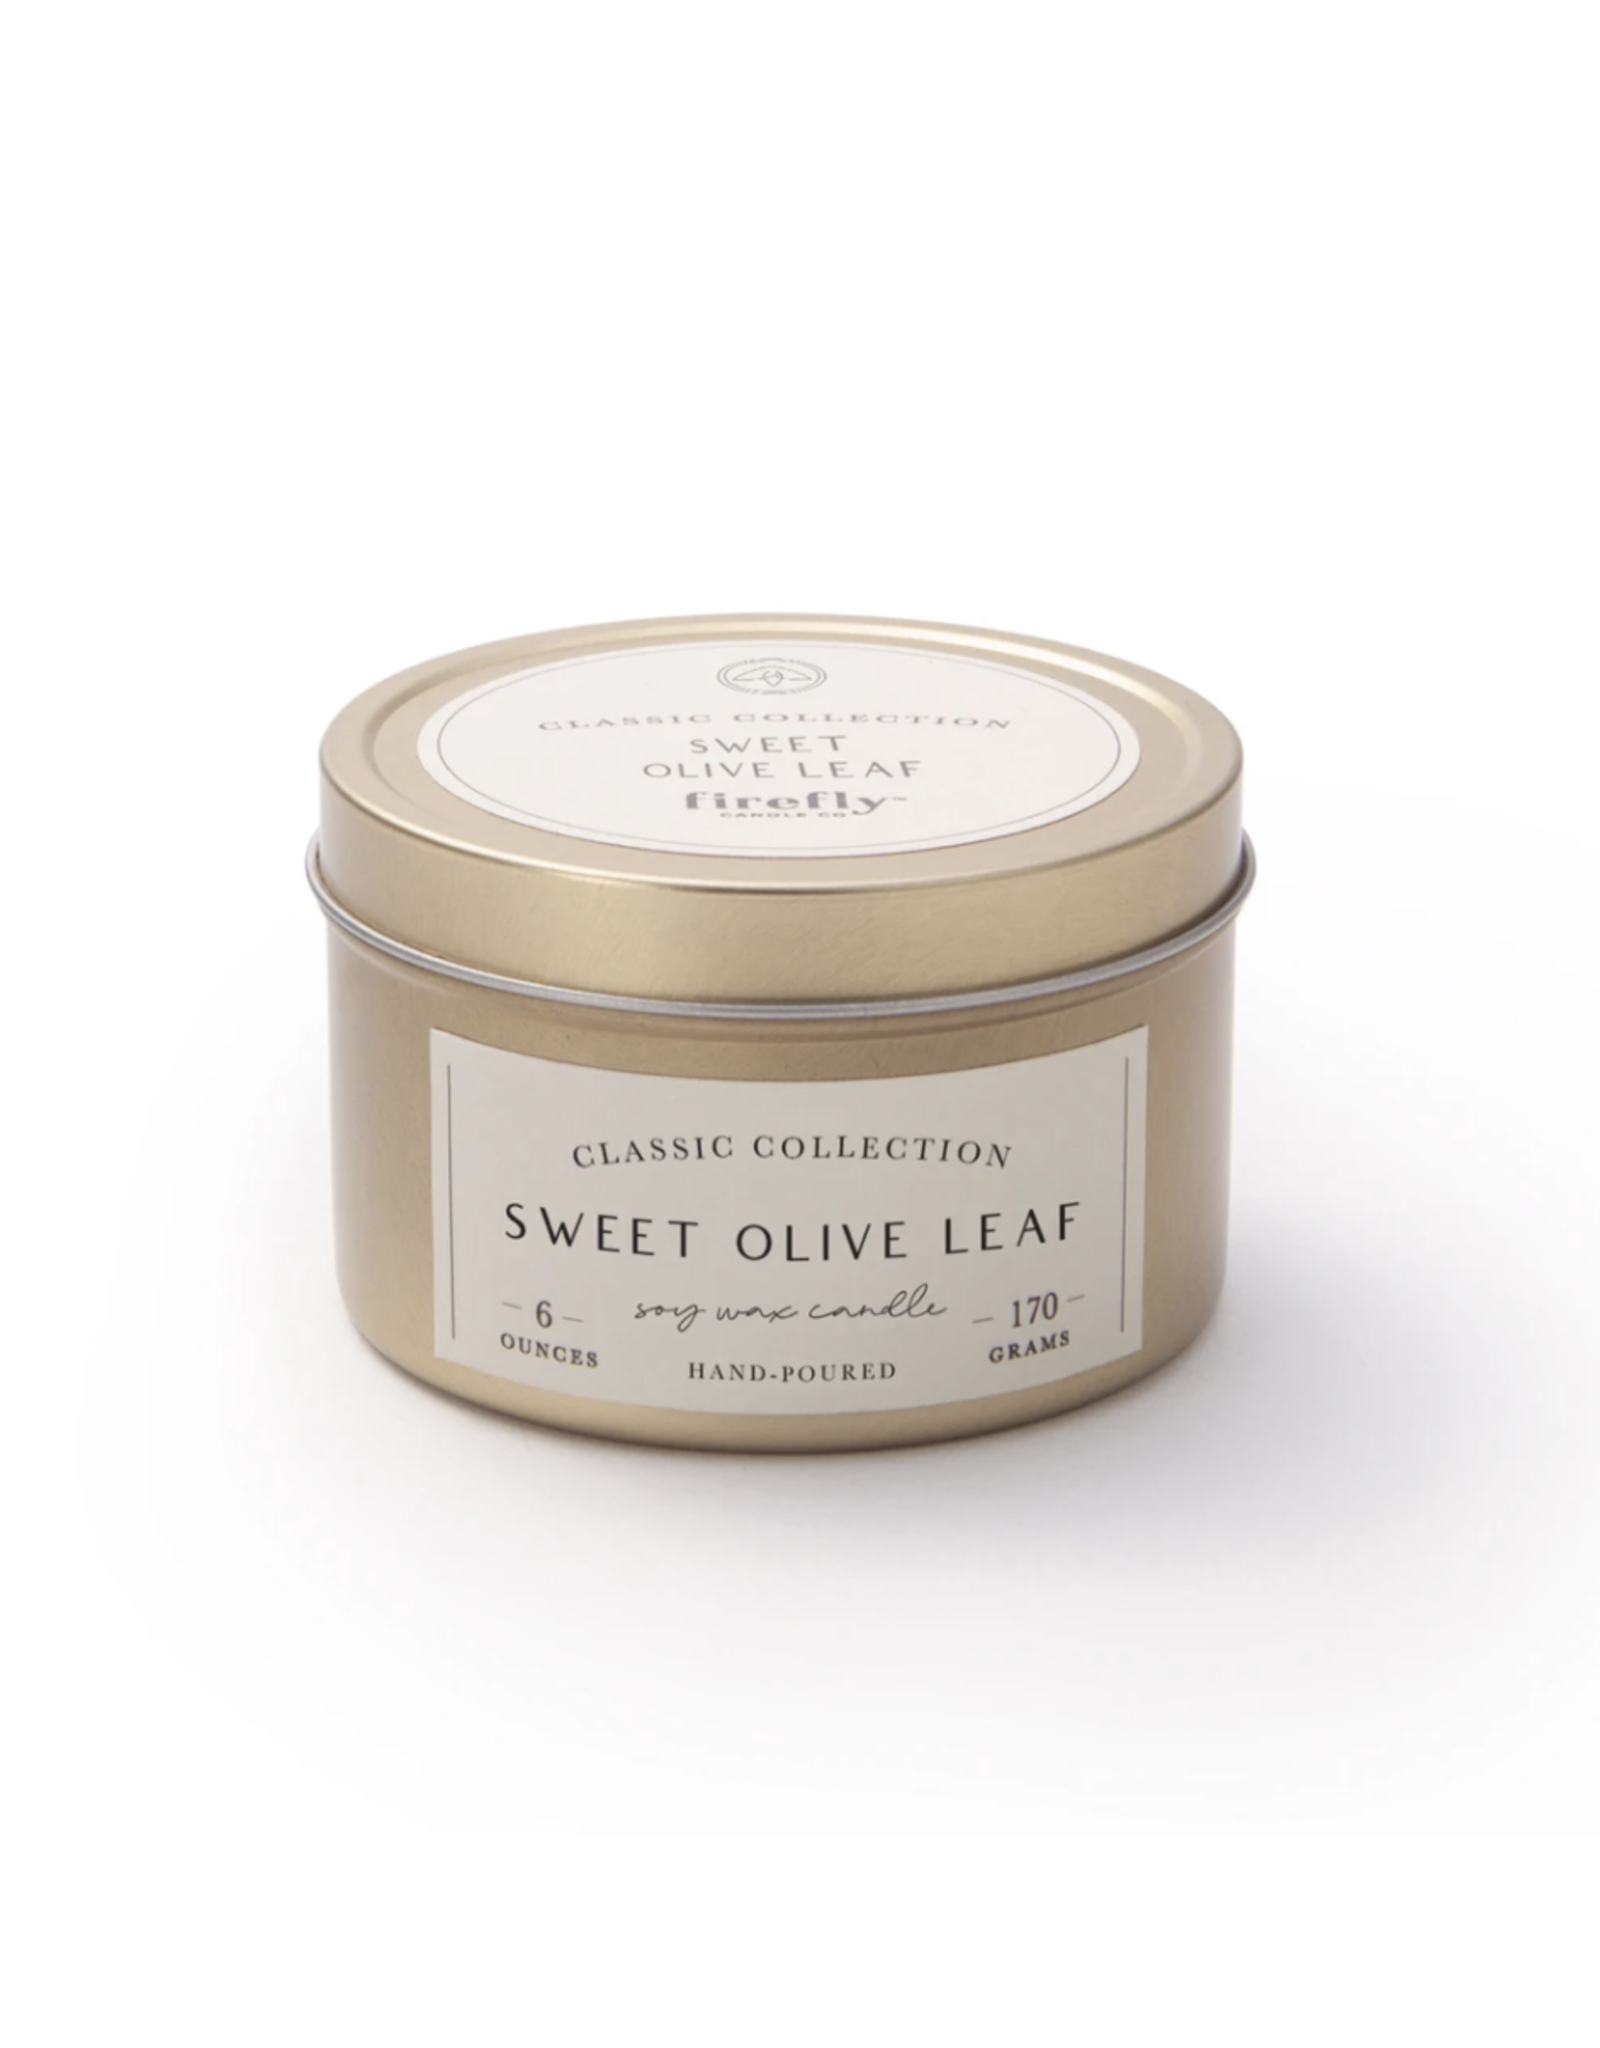 Firefly Gold Tin - Sweet Olive Leaf Candle